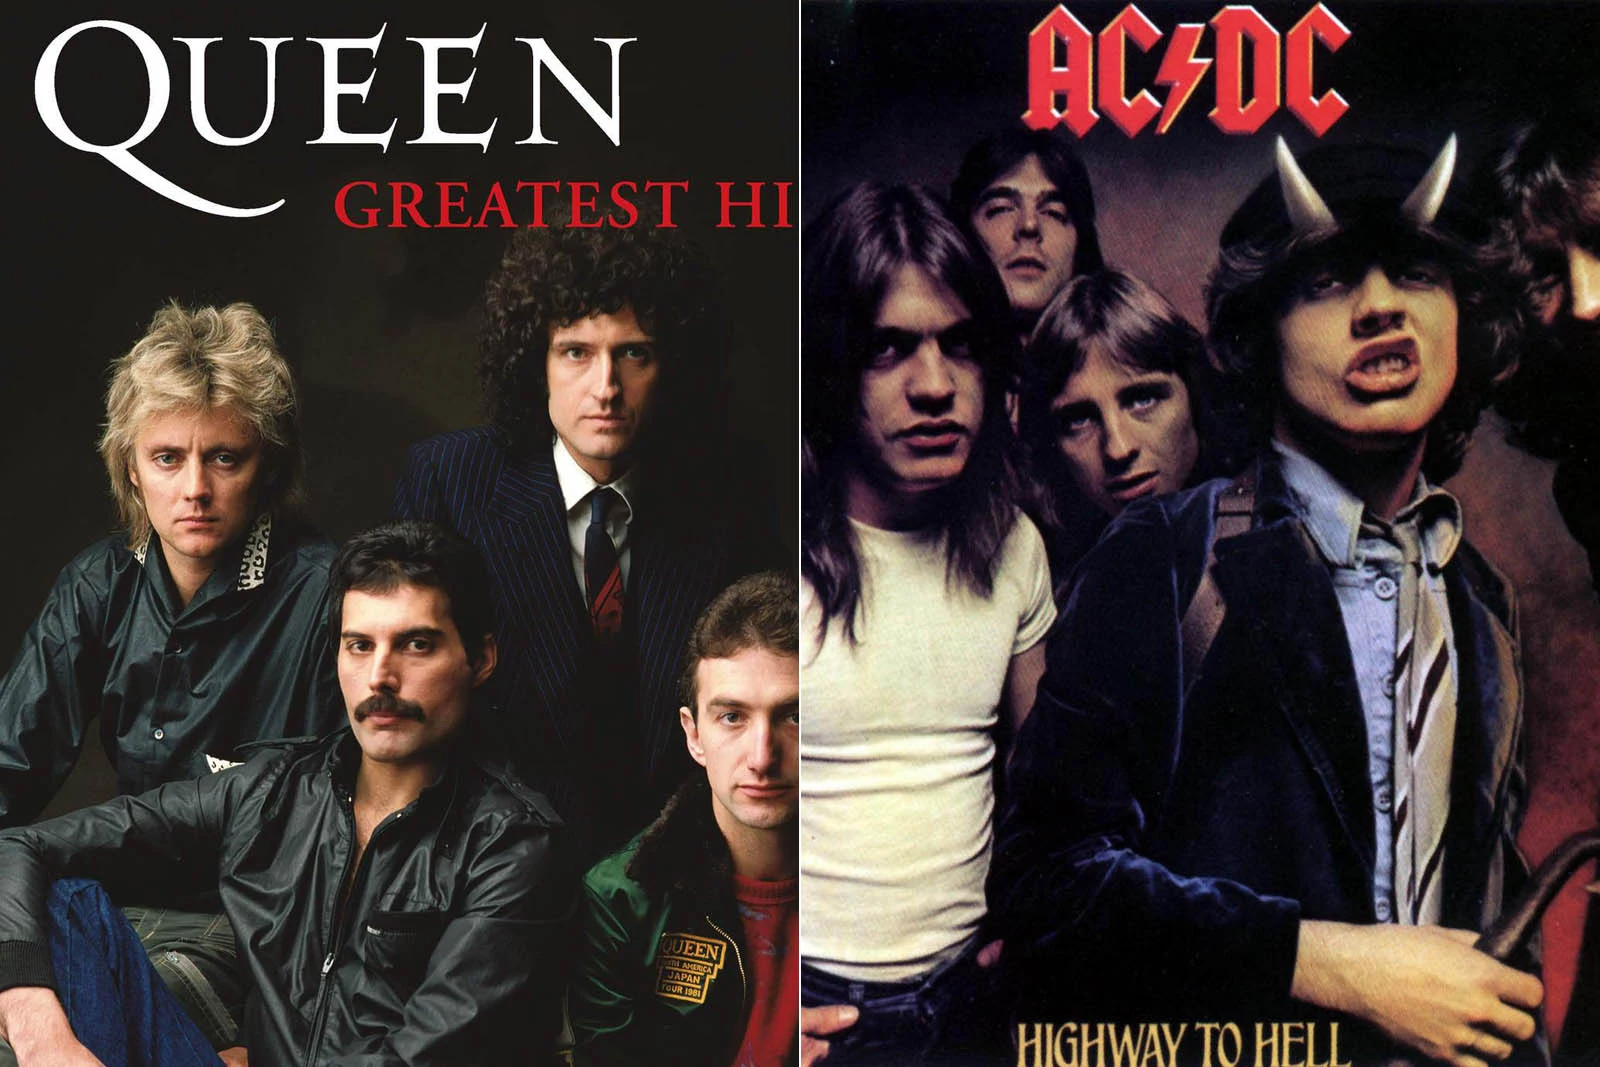 March Bandness 2017: AC/DC VS Queen – VOTE HERE